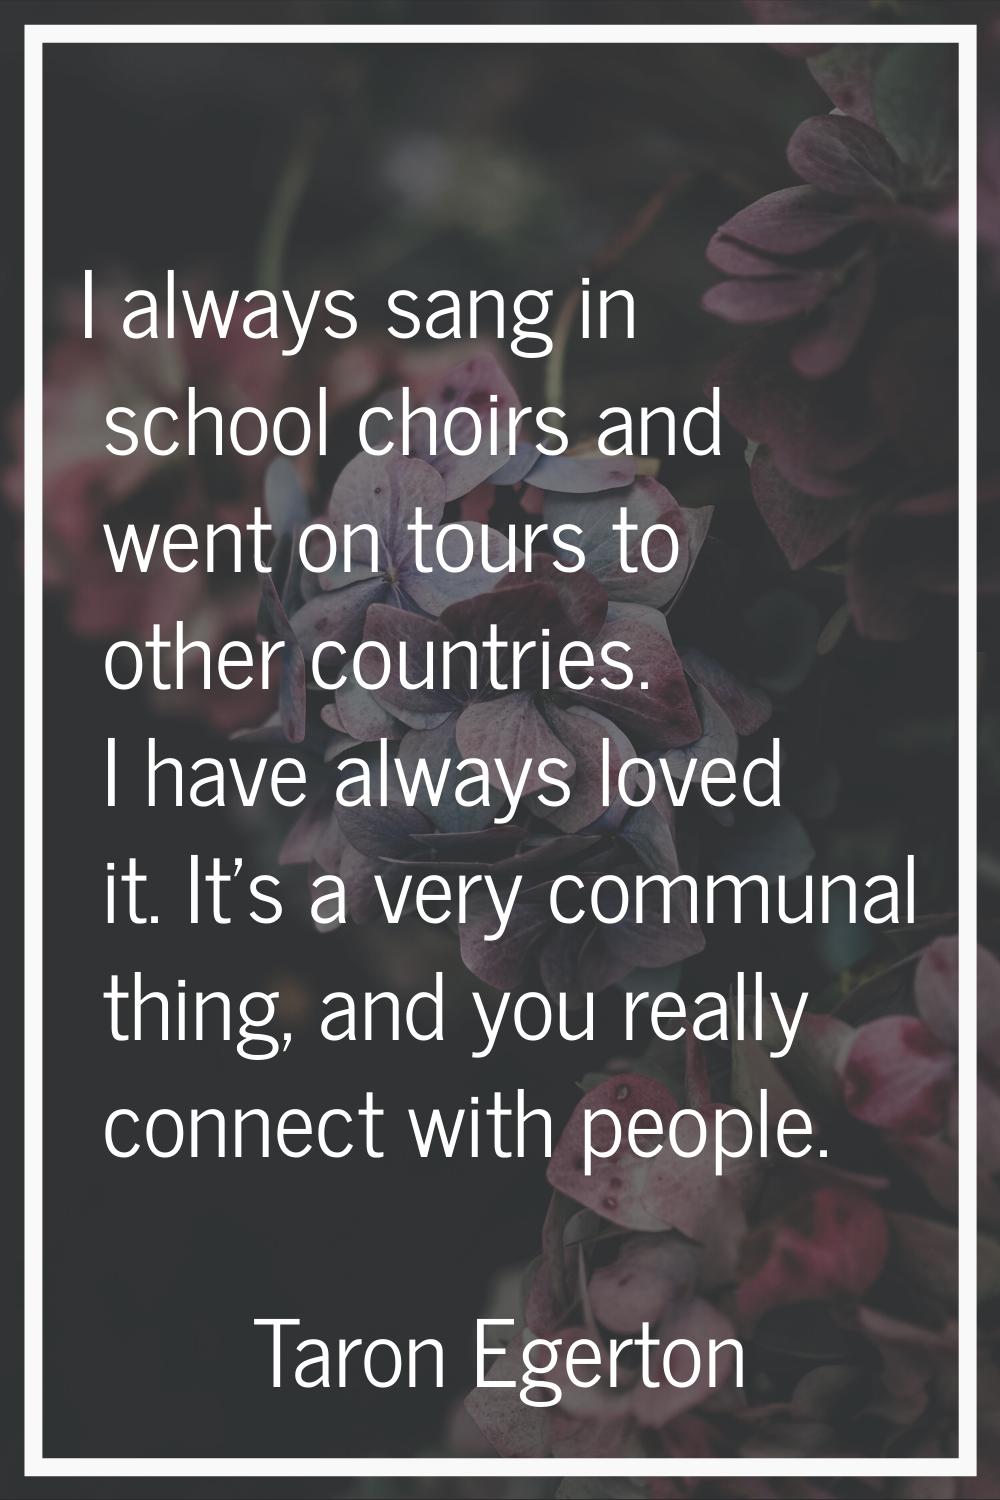 I always sang in school choirs and went on tours to other countries. I have always loved it. It's a